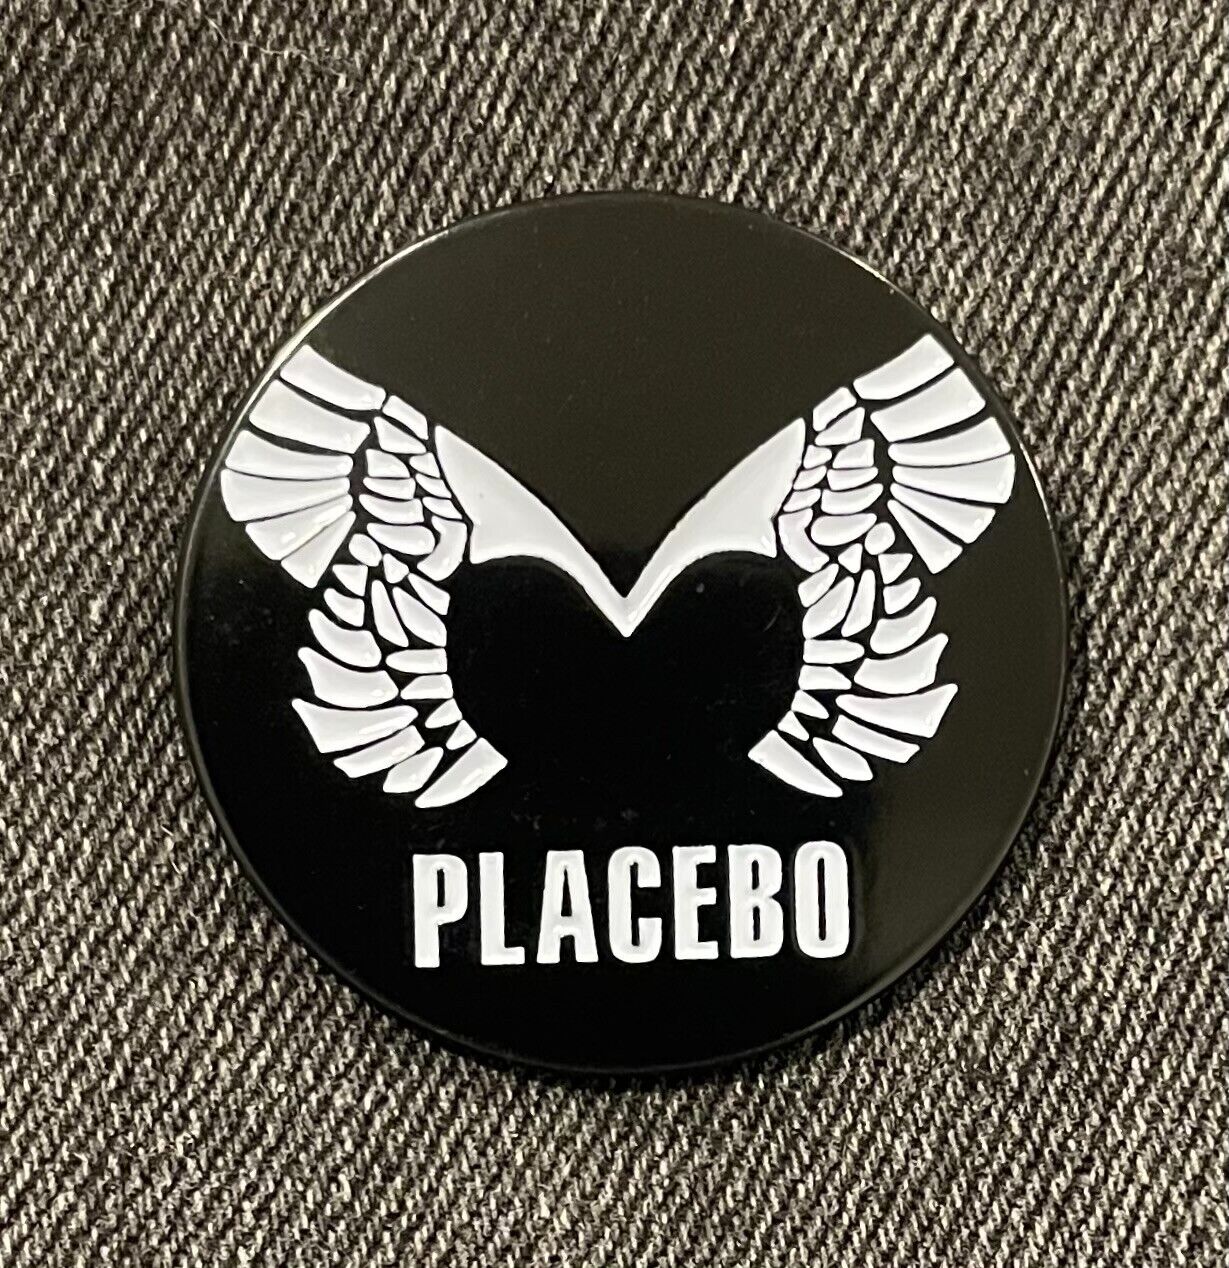 Placebo - Without You I'm Nothing  - Collapse into Never - Enamel Pin